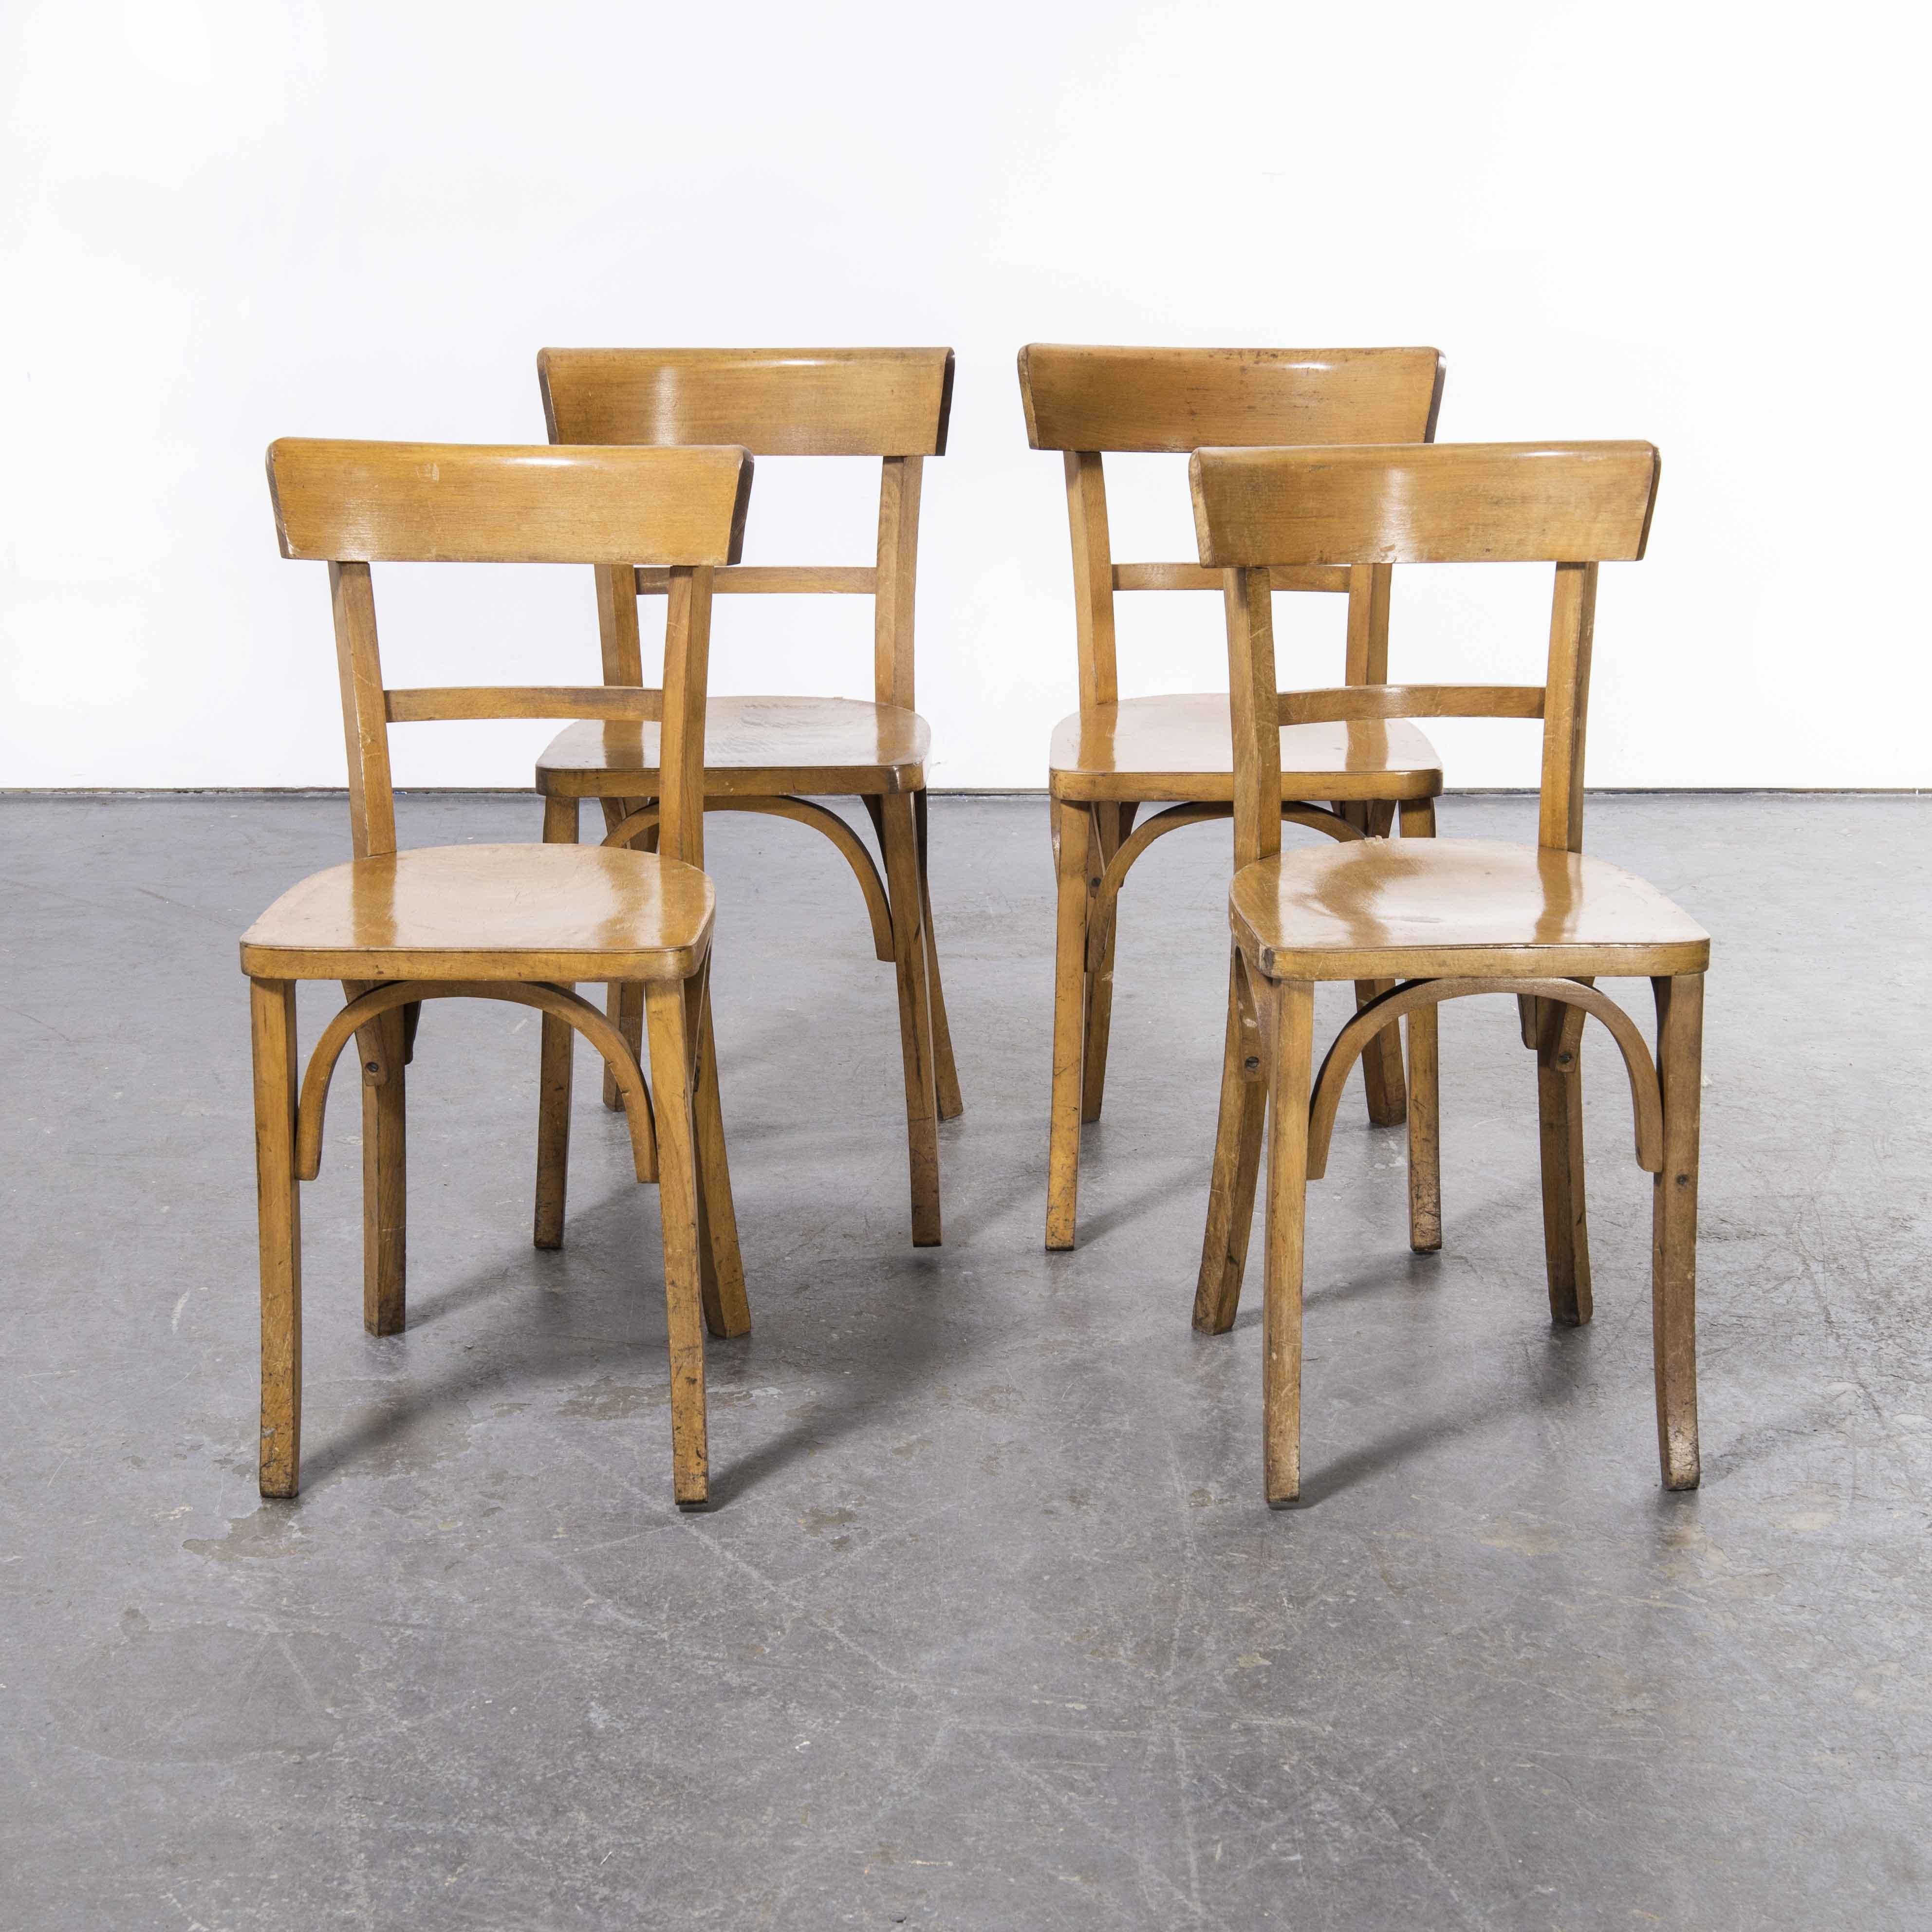 1950’s Baumann Bentwood bistro dining chair – single bar back – set of four
1950’s Baumann Bentwood bistro dining chair – single bar back – set of four. Classic Beech bistro chair made in France by the maker Baumann. Baumann is a slightly off the